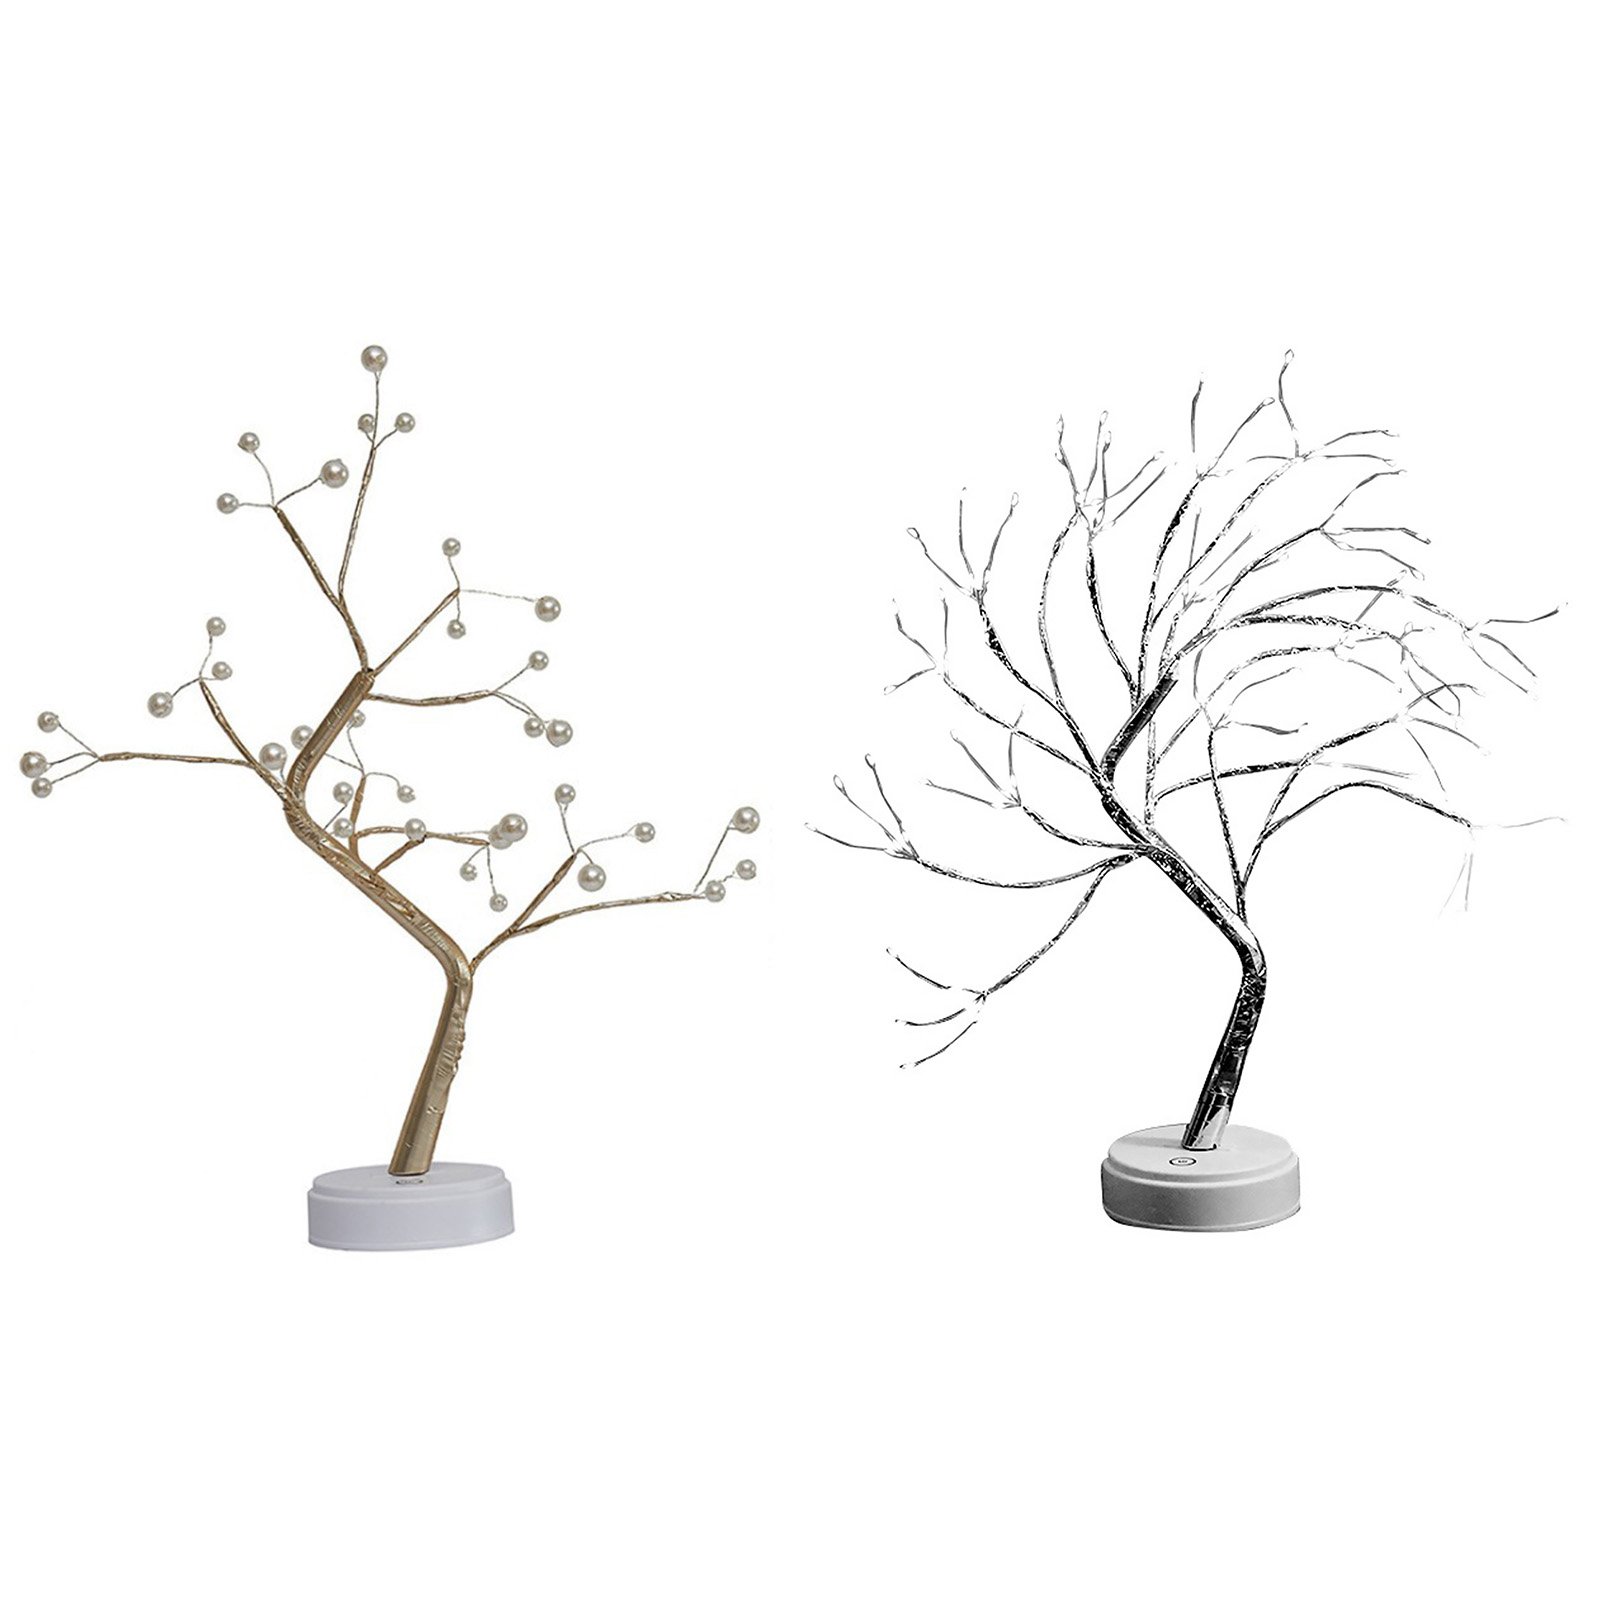 36/108LED Bonsai Tree Light Battery/USB Powered Exquisite Bedside Night Light Festival Gift Tabletop Ornaments for Wedding Party